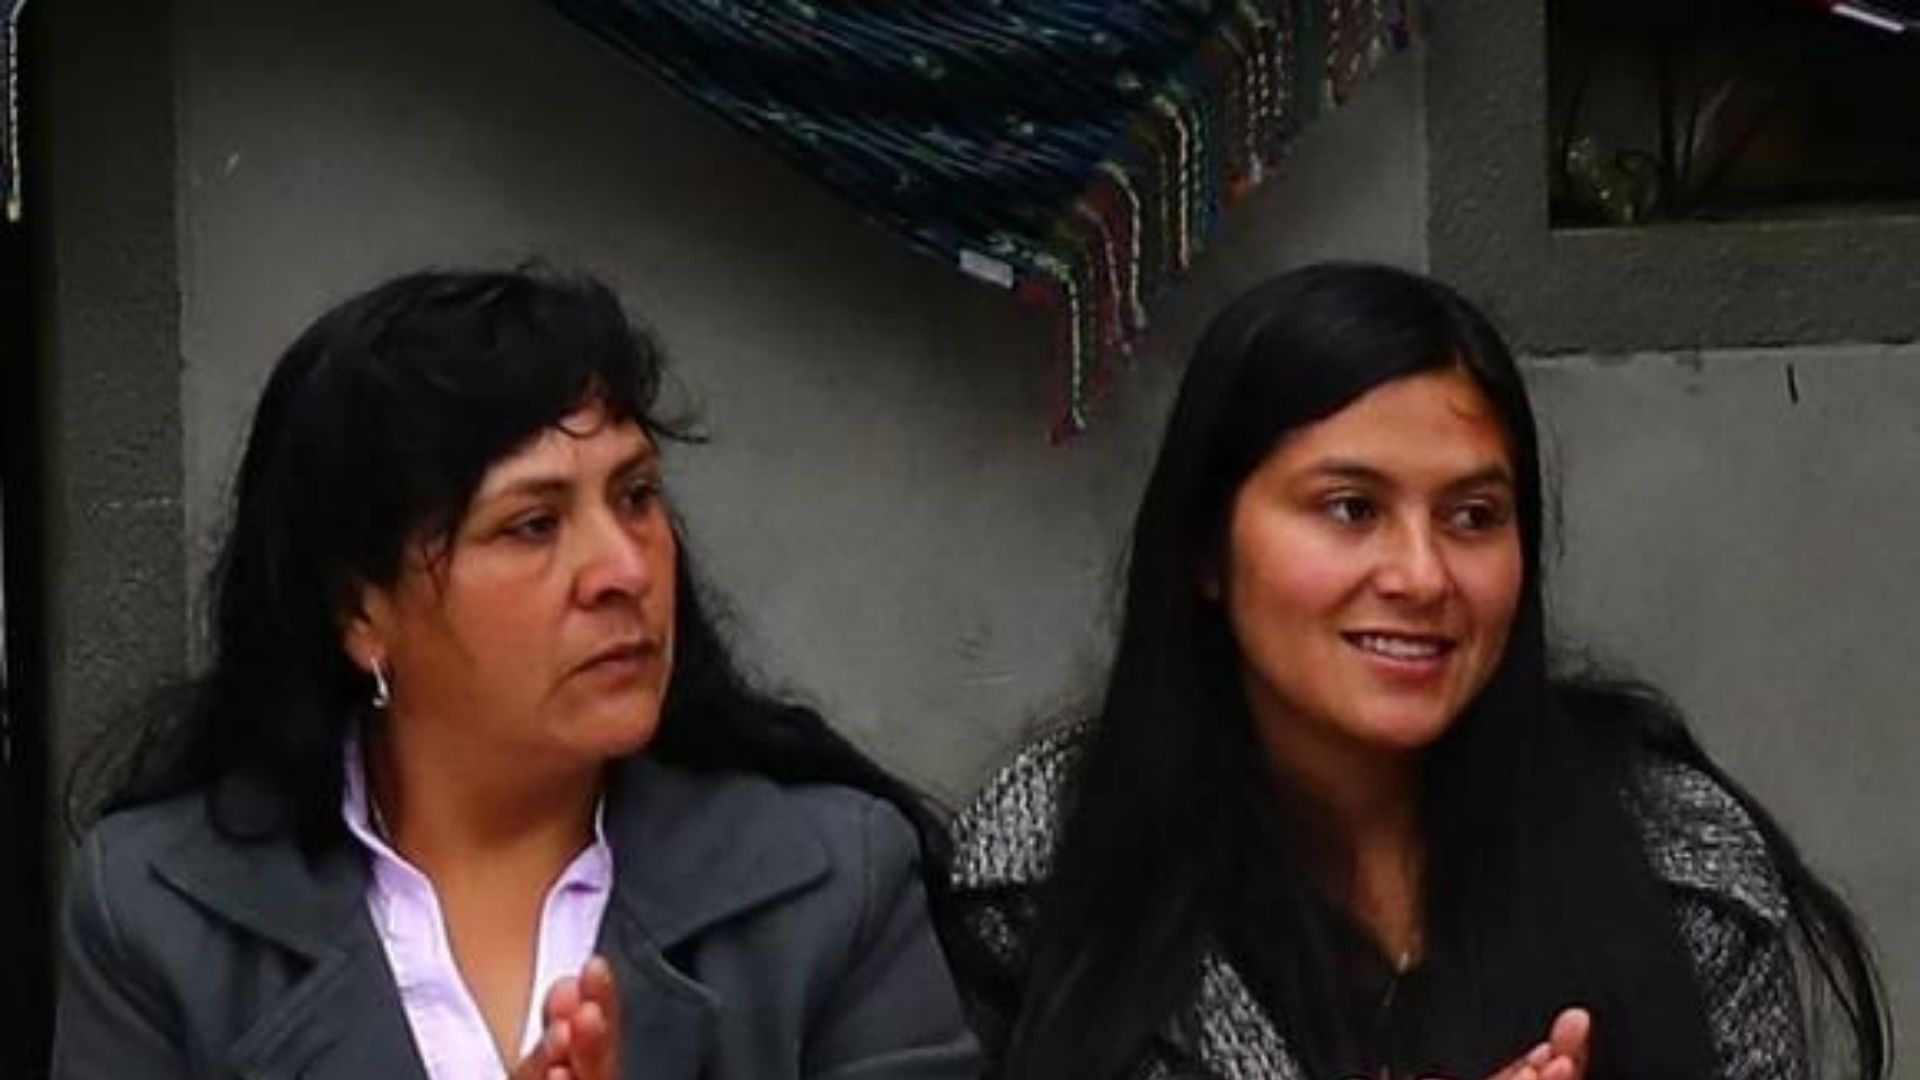 Lilia Paredes and Yenifer Paredes are accused of creating a criminal organization in the government palace.